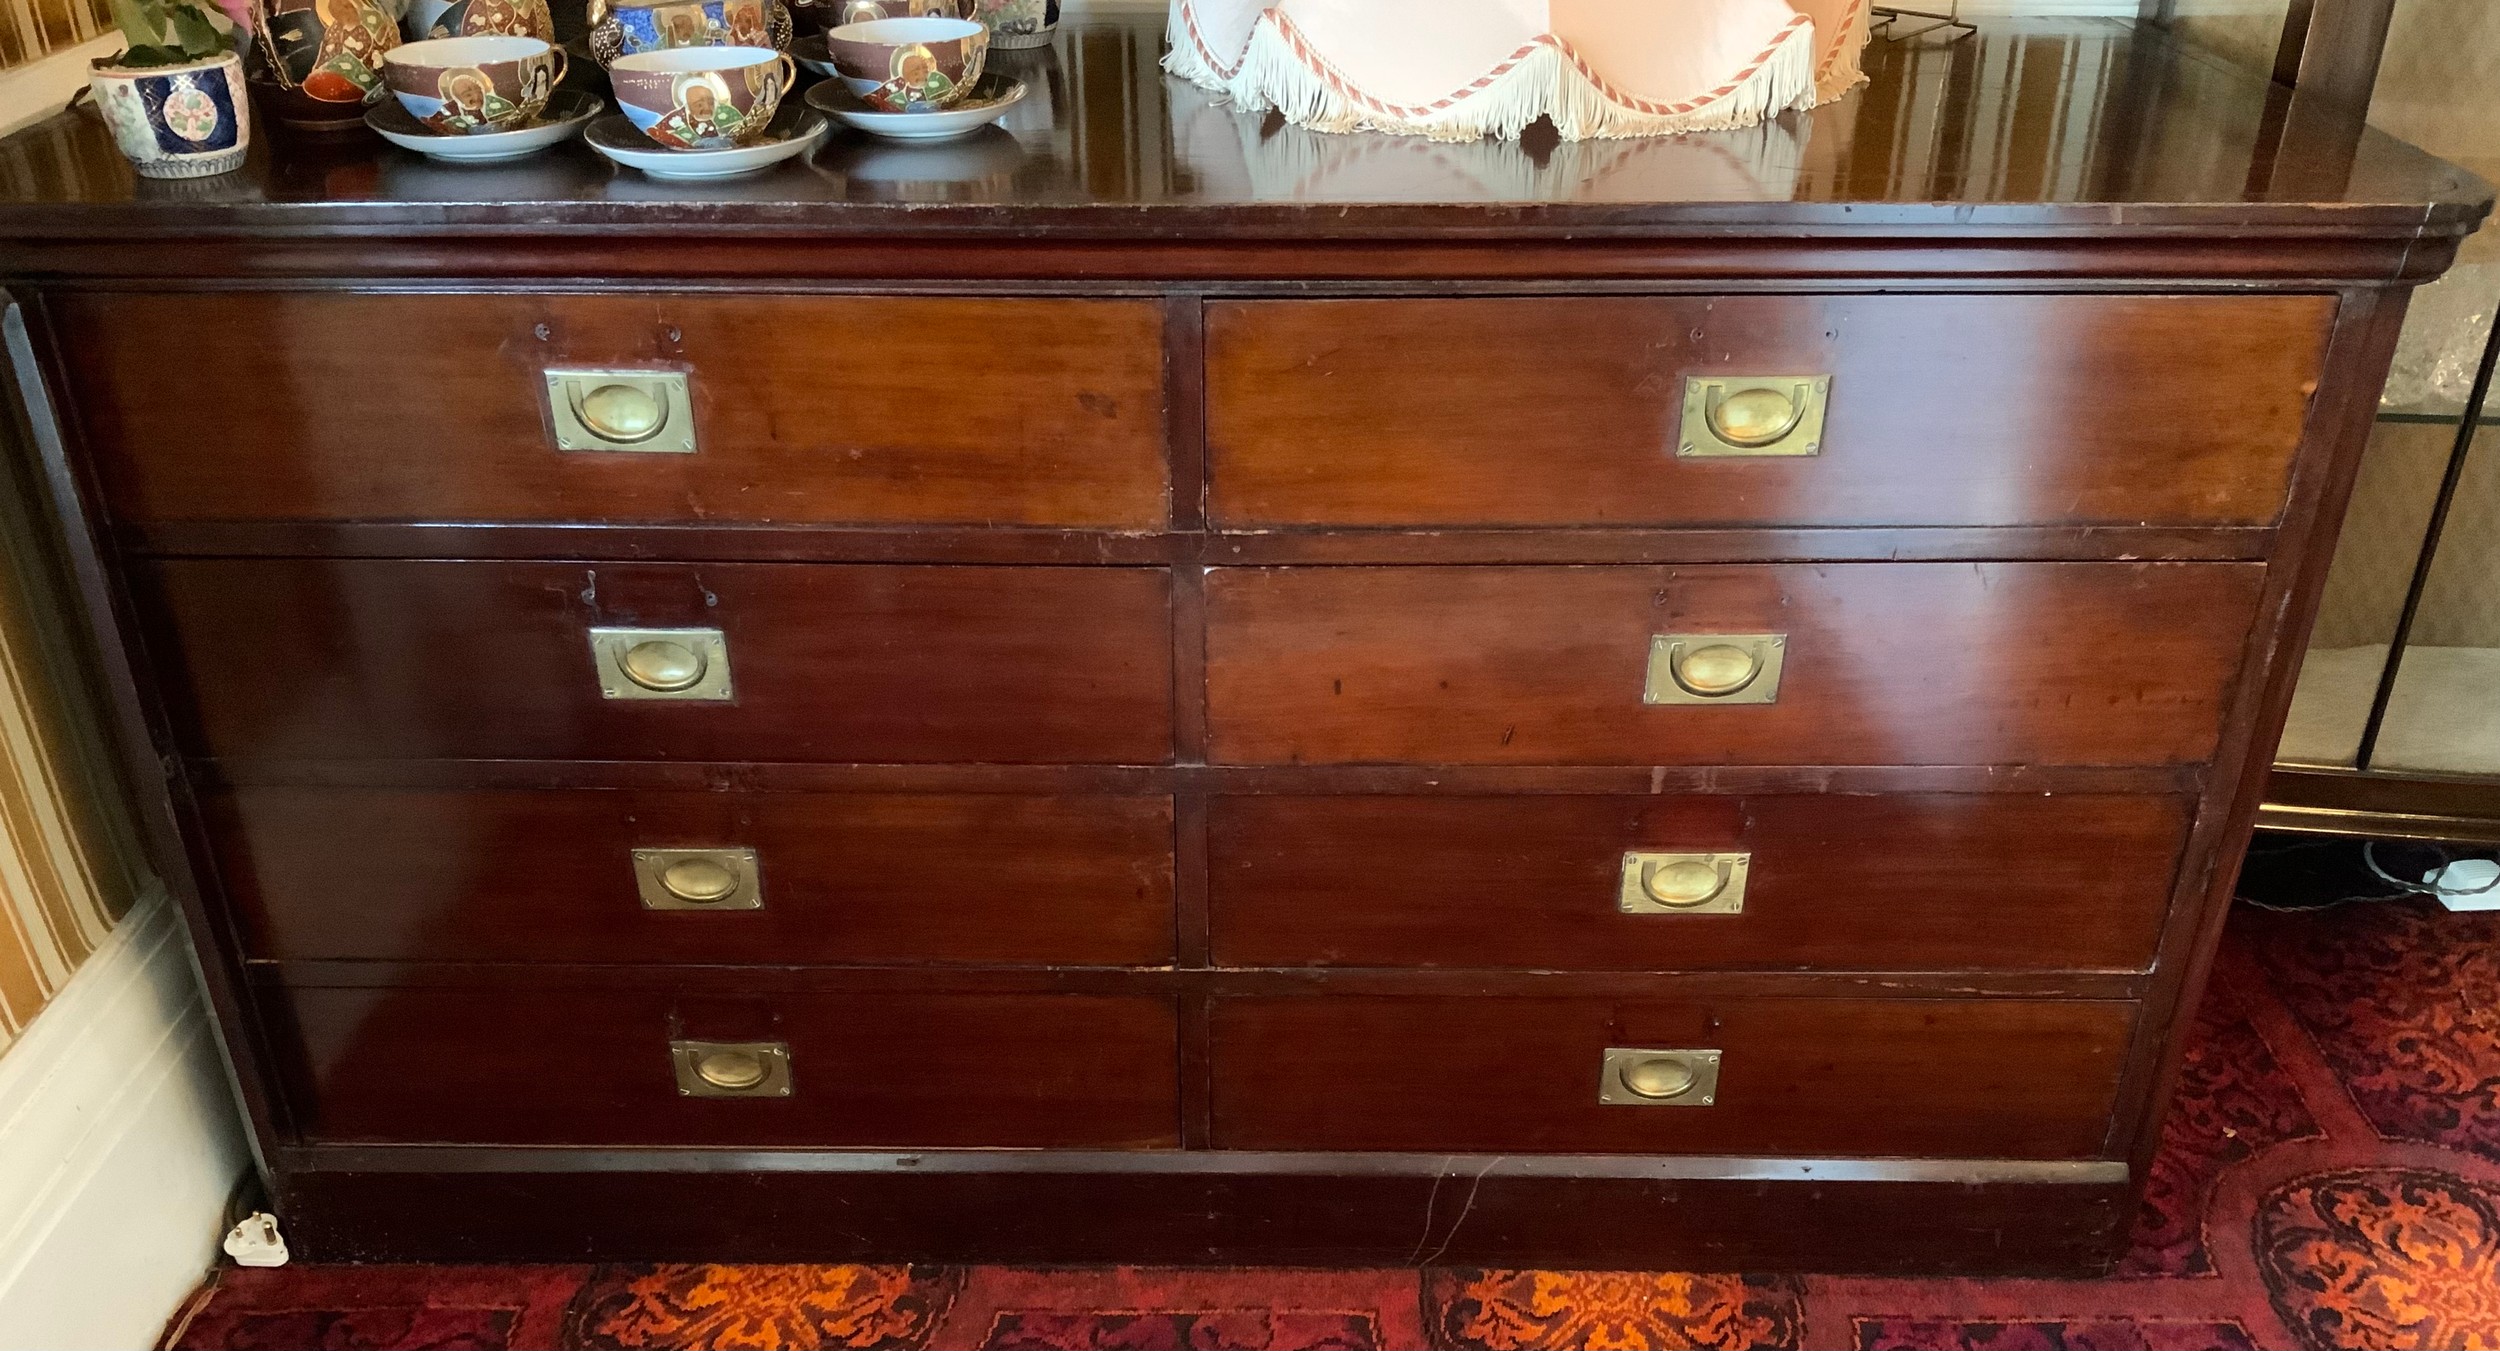 A 19th century mahogany chest, rounded rectangular top, two rows of four drawers, one side with